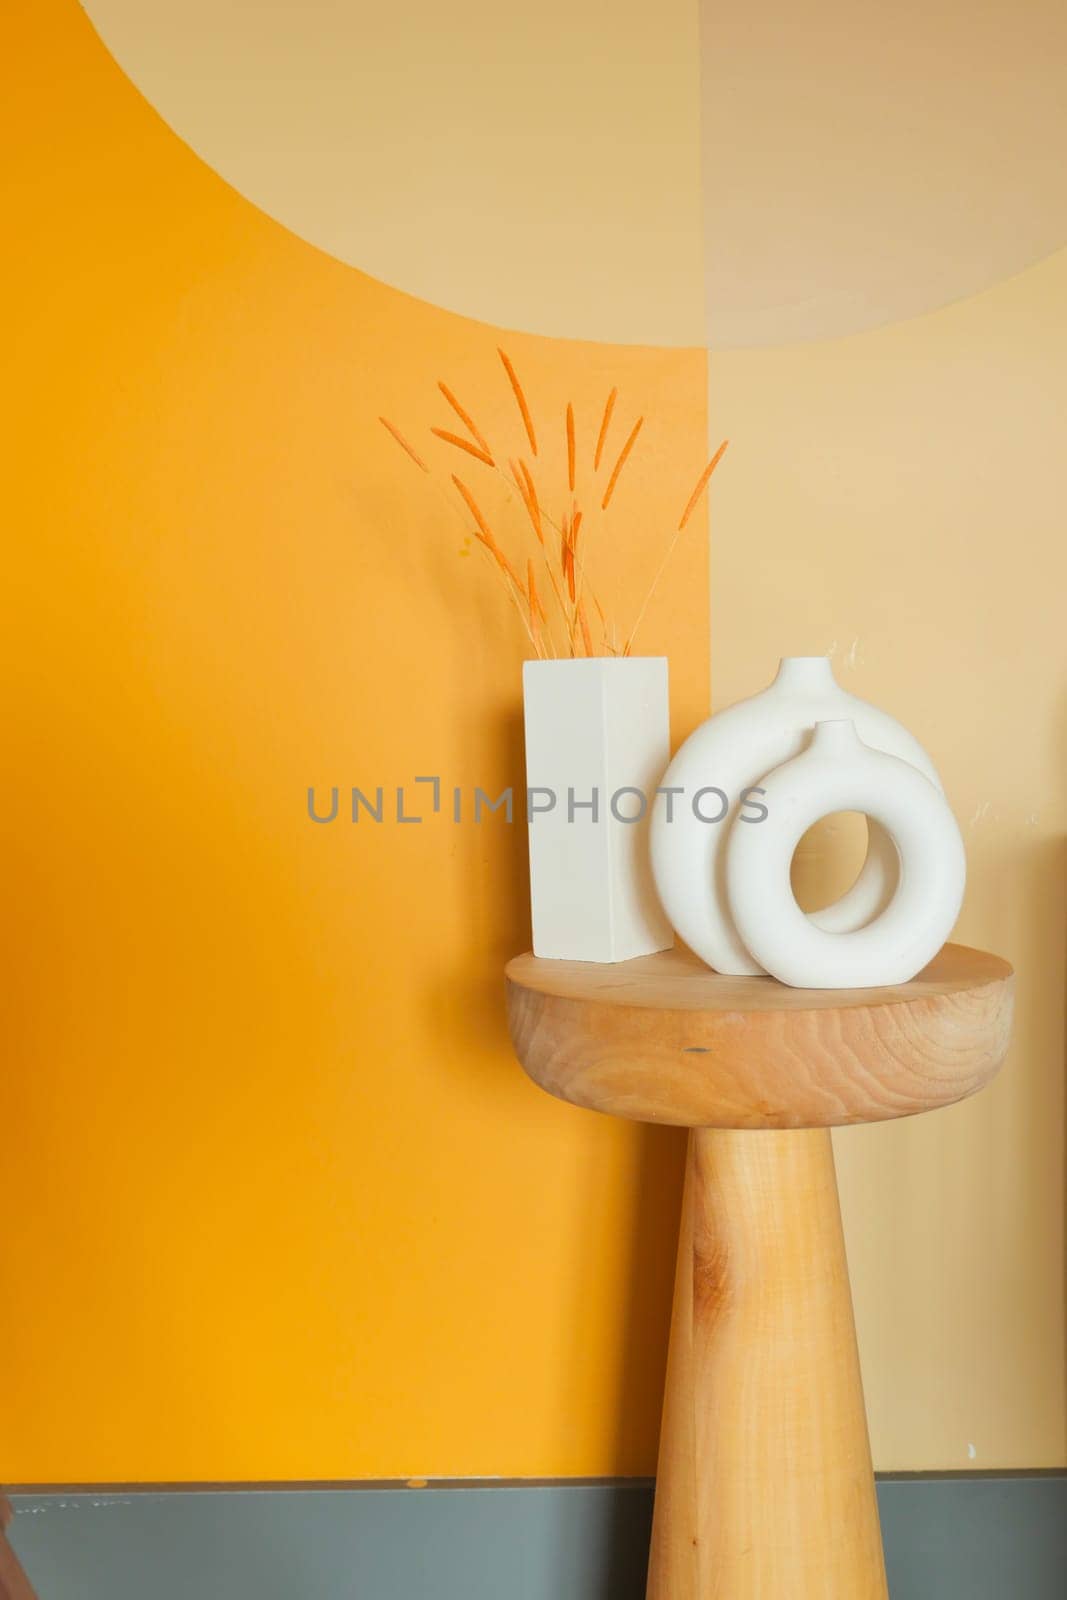 Wooden table with vase and sculpture on it, against yellow wall in room.